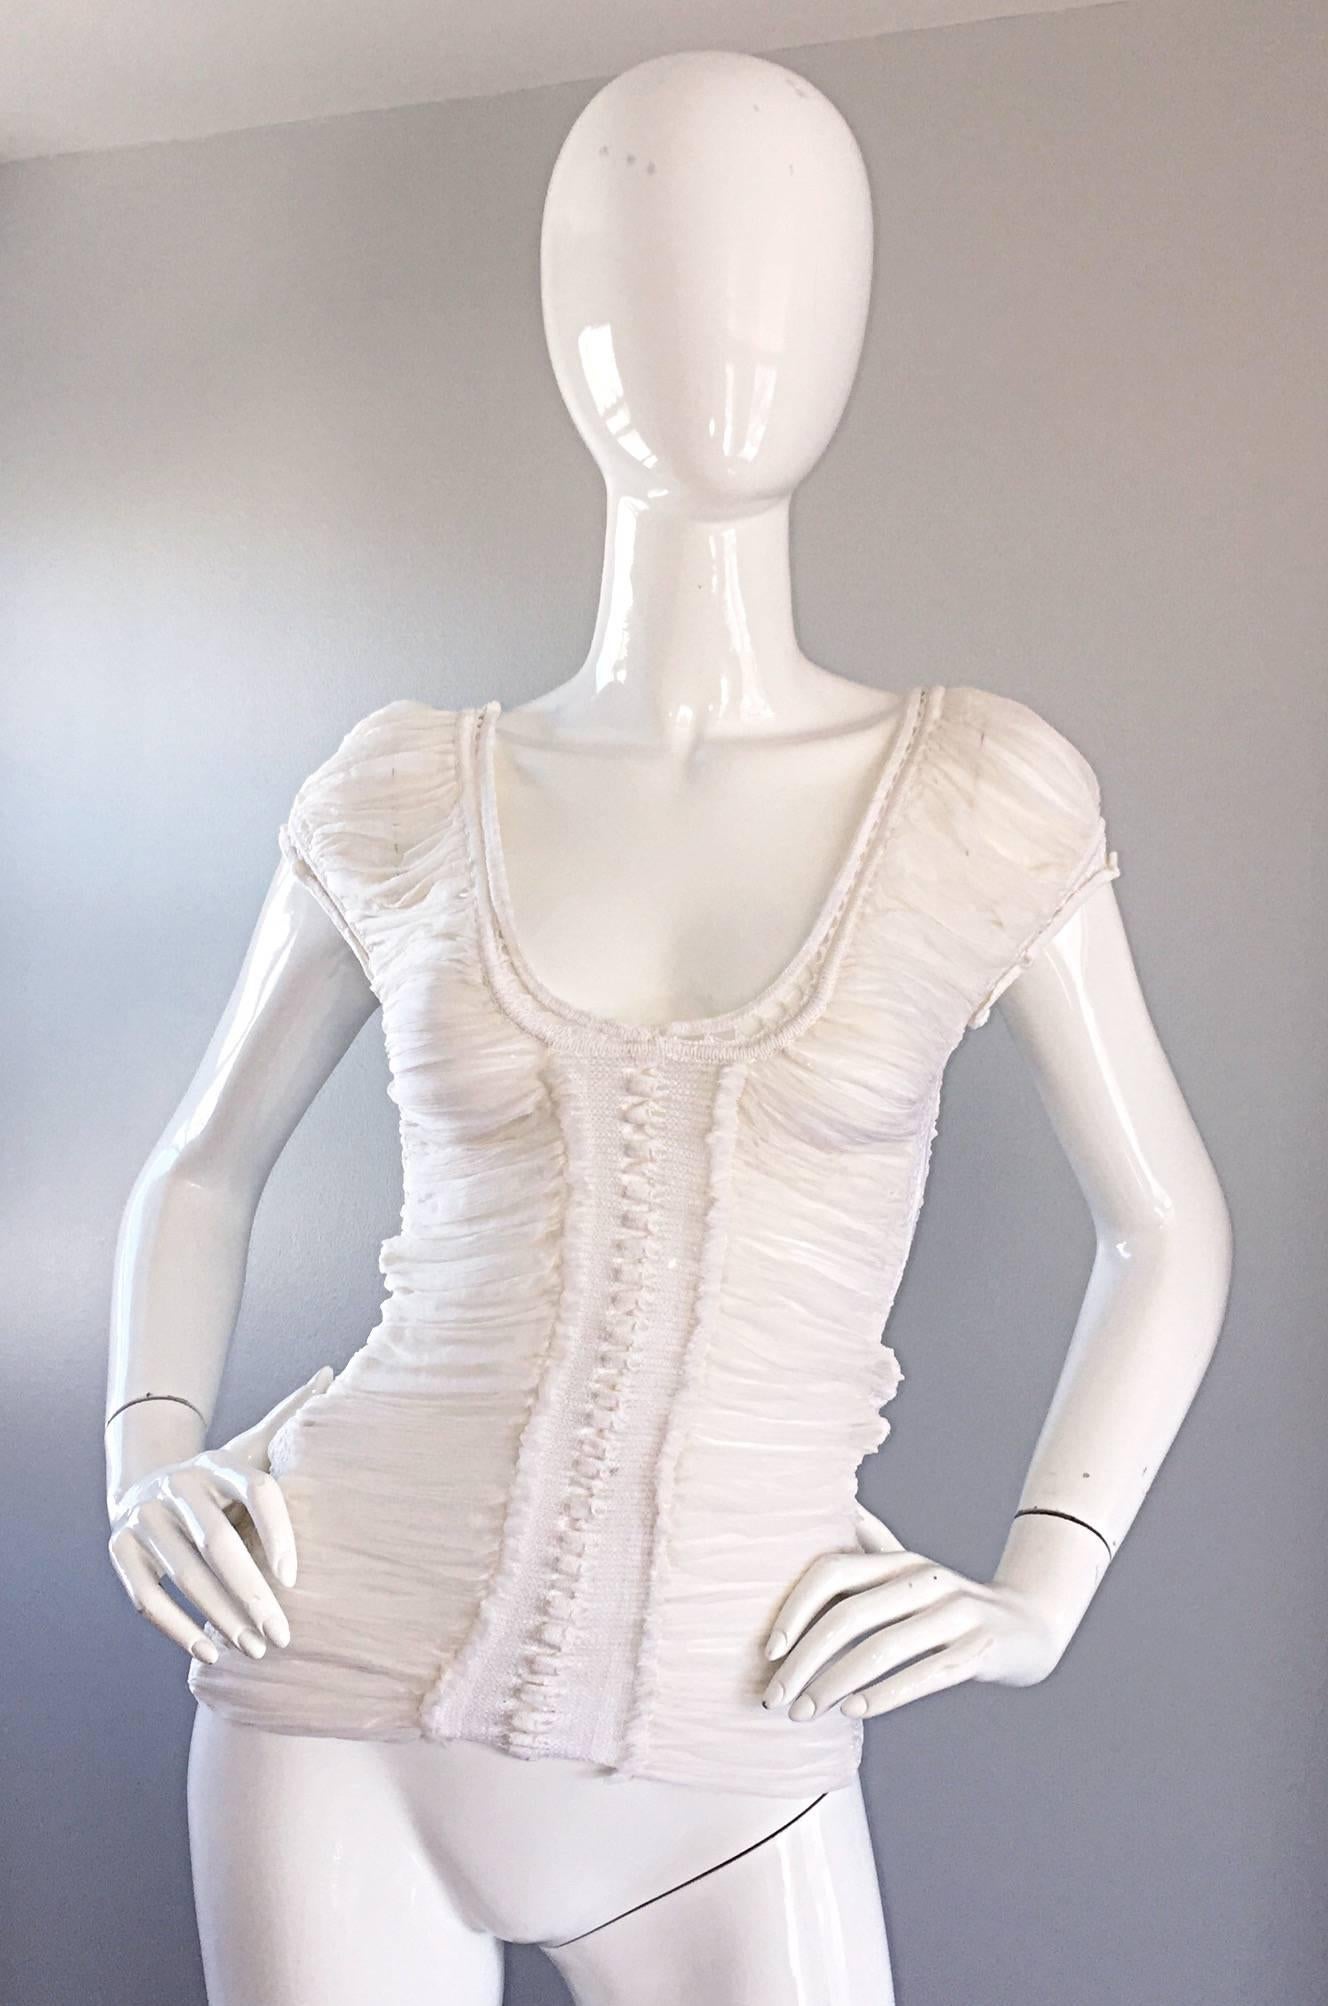 Beautiful 90s ROBERTO CAVALLI stark white silk chiffon and crochet blouse! Features the softest, most luxurious silk you have ever felt! Layers of pleated chiffon, with crochet details at mid bodice, bust and at the cap sleeve trim. Can easily be